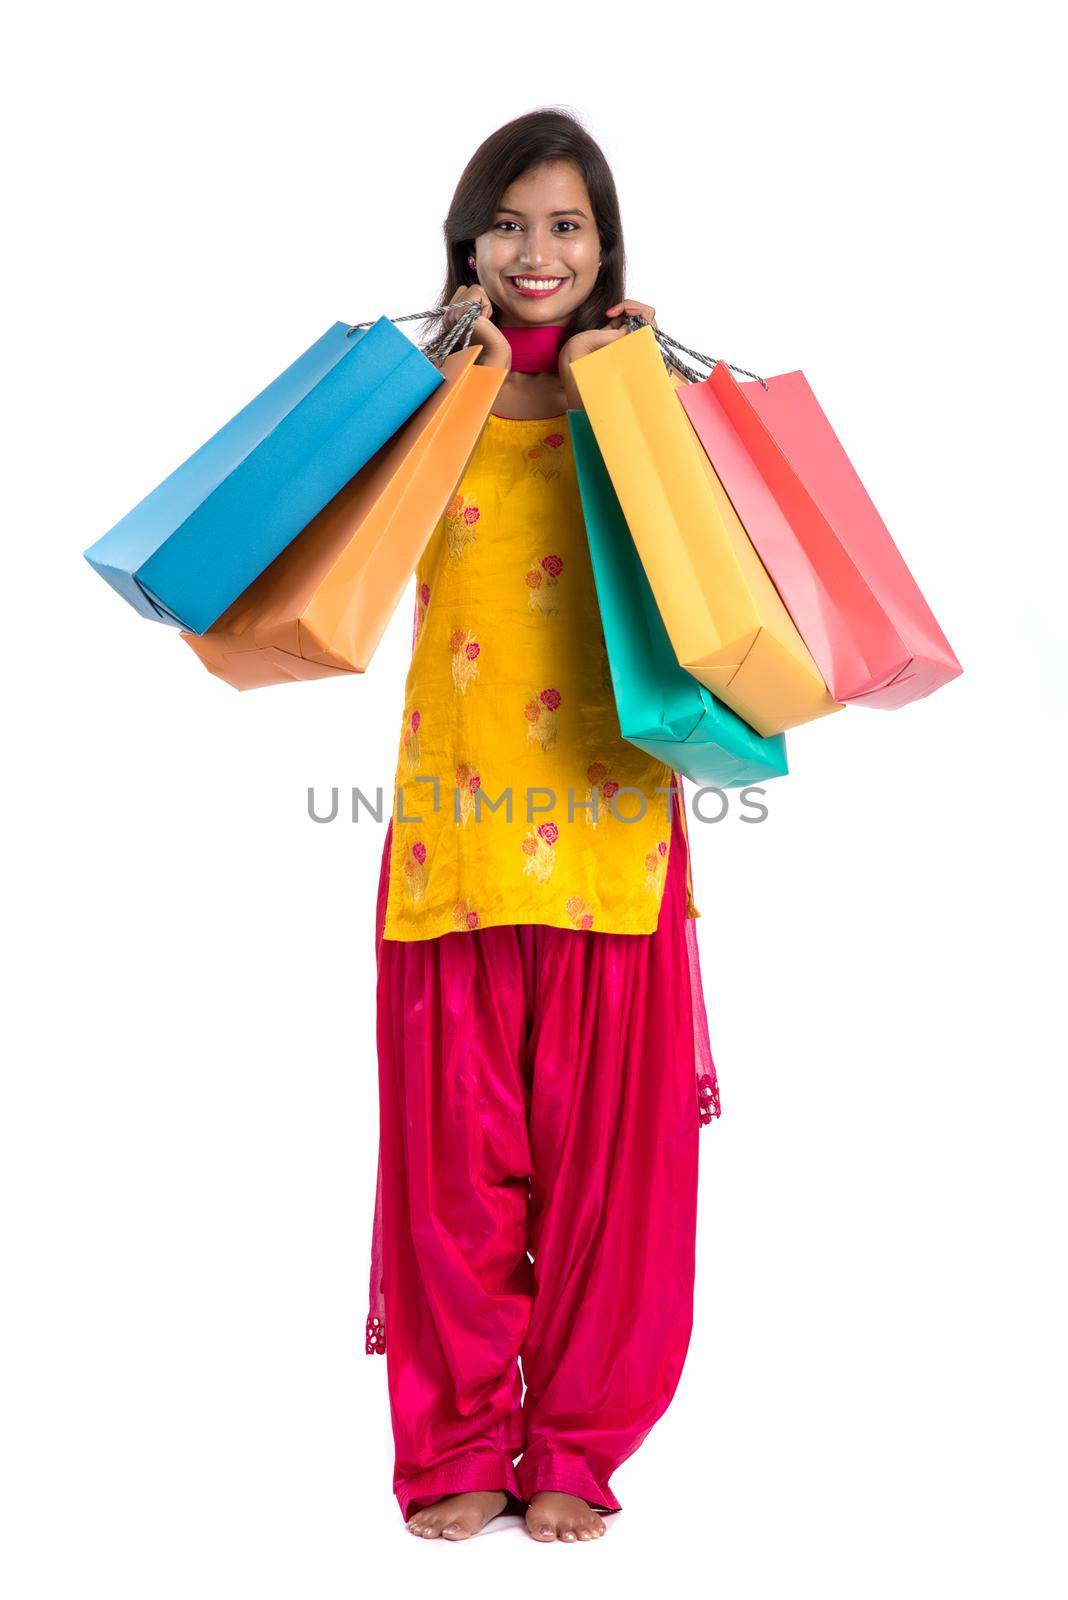 Beautiful Indian young girl holding and posing with shopping bags on a white background